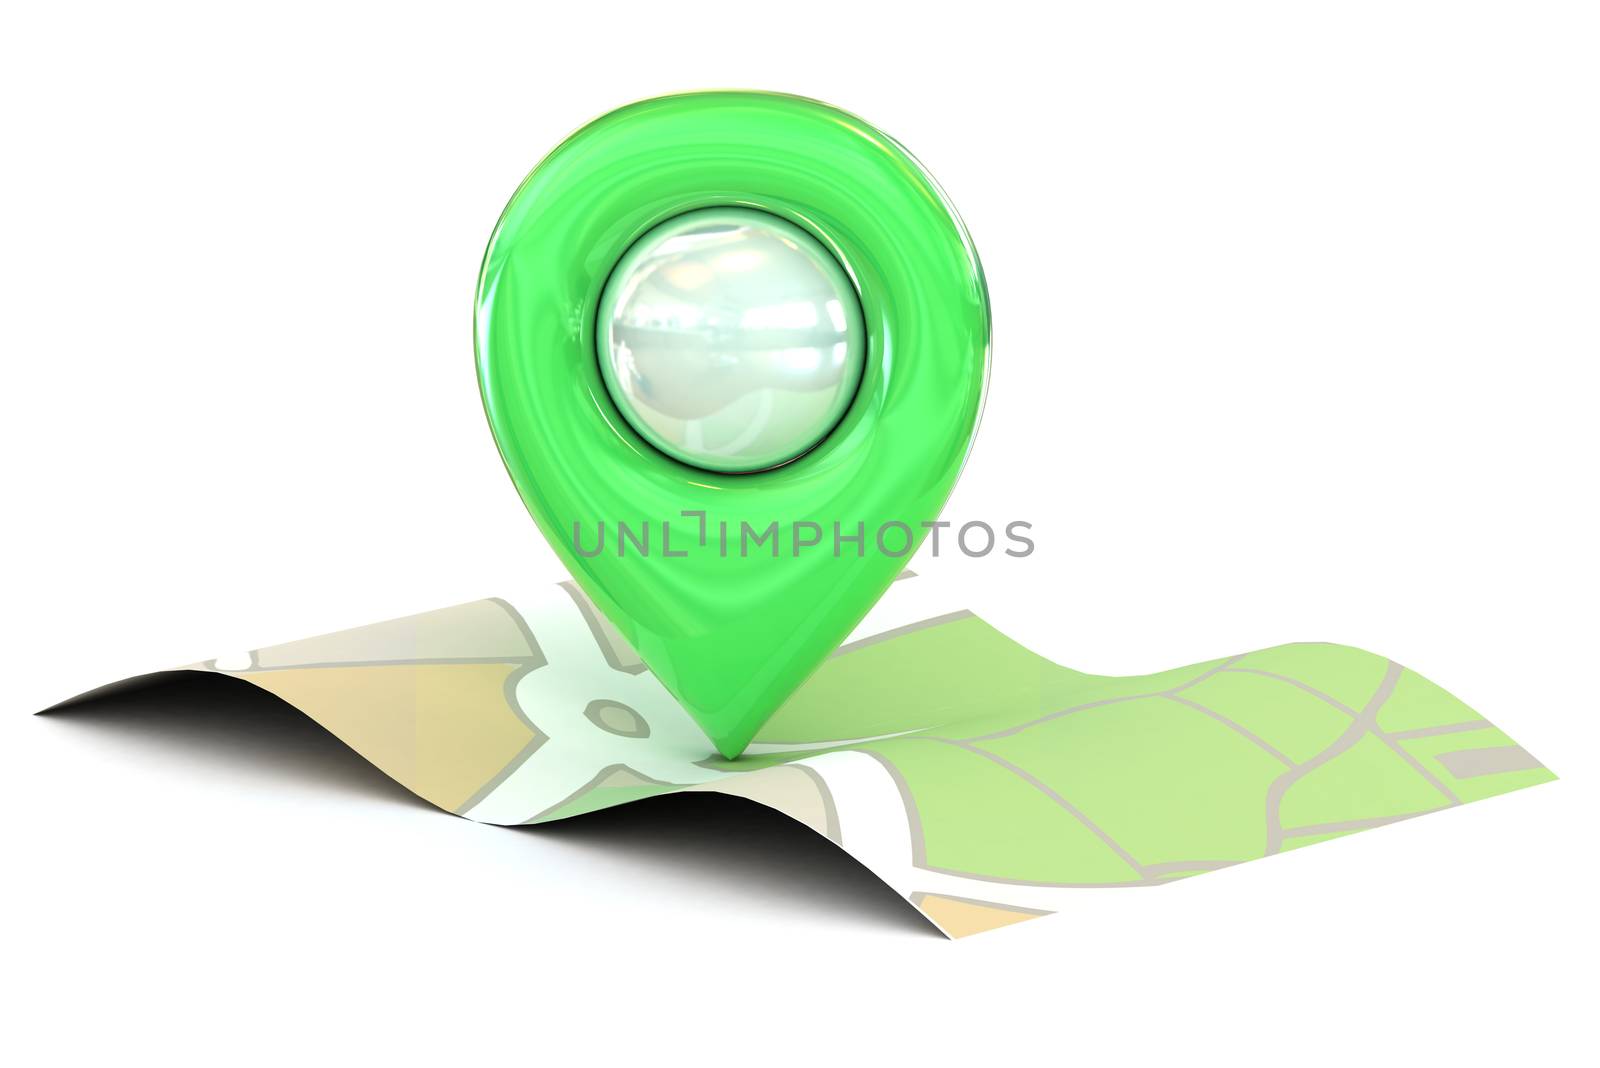 A Colourful 3d Rendered Map or GPS Marker Icon